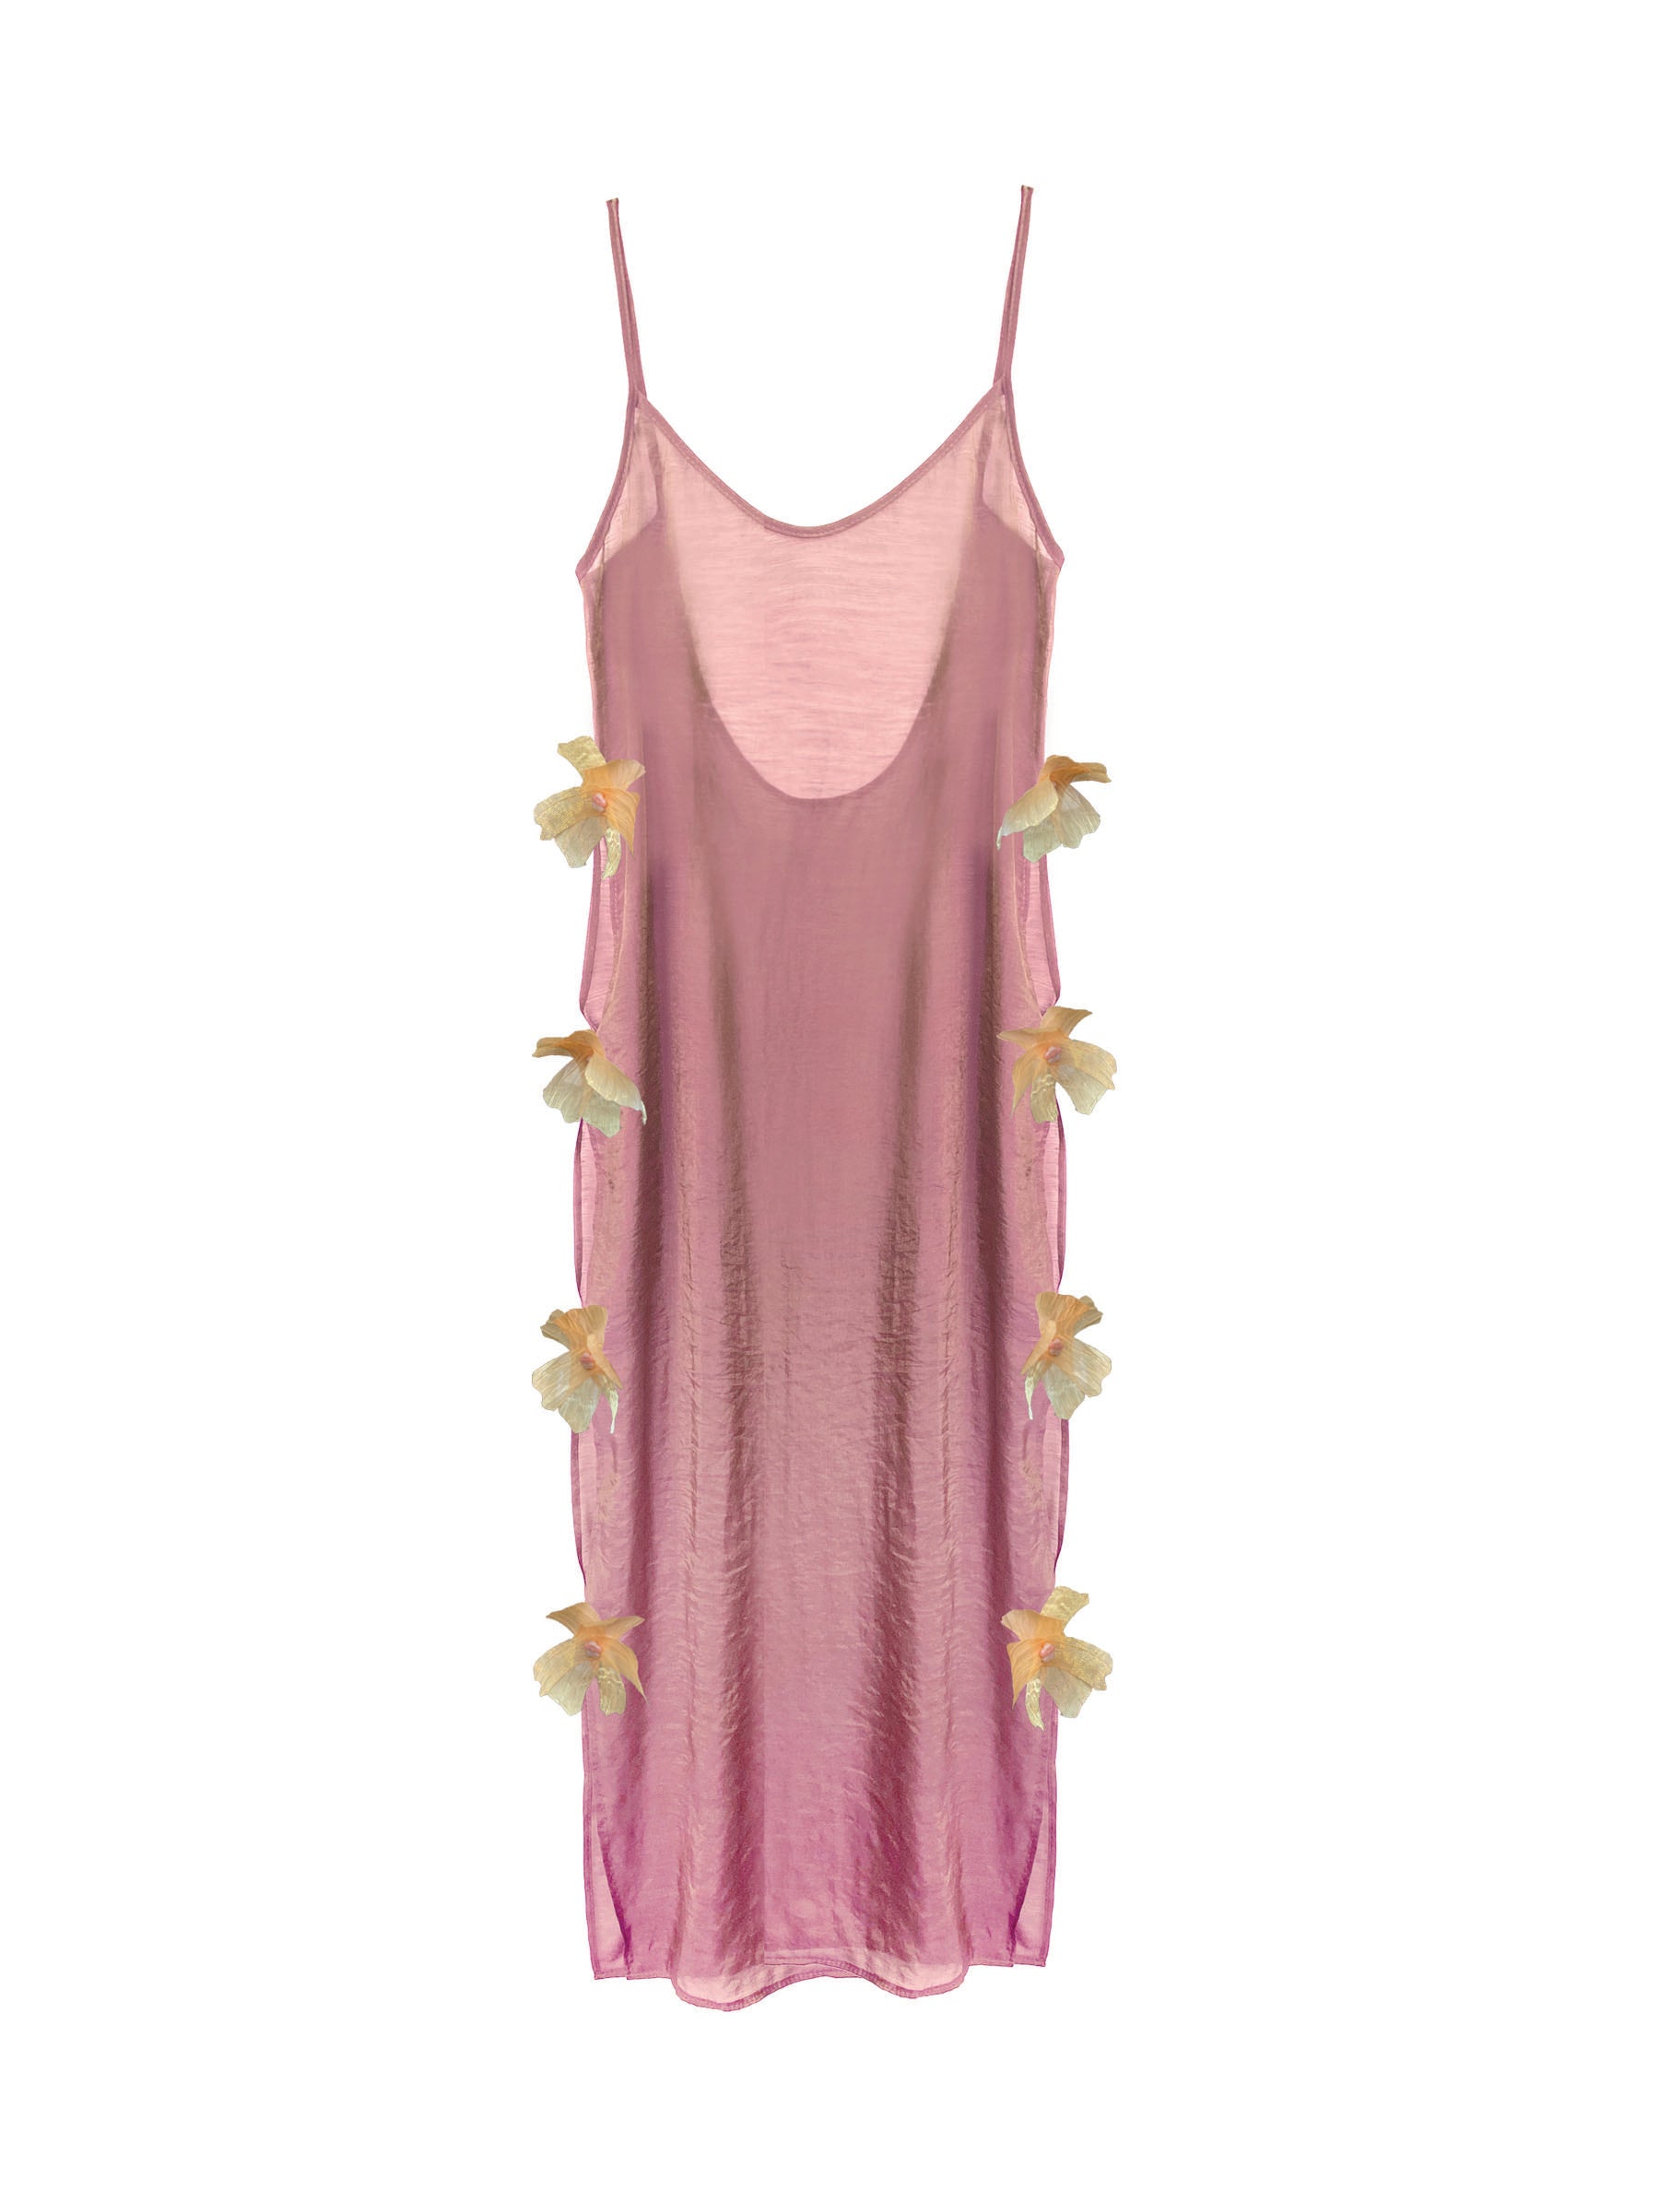 Midi_length_crushed_pink_slip_dress_with_flowers